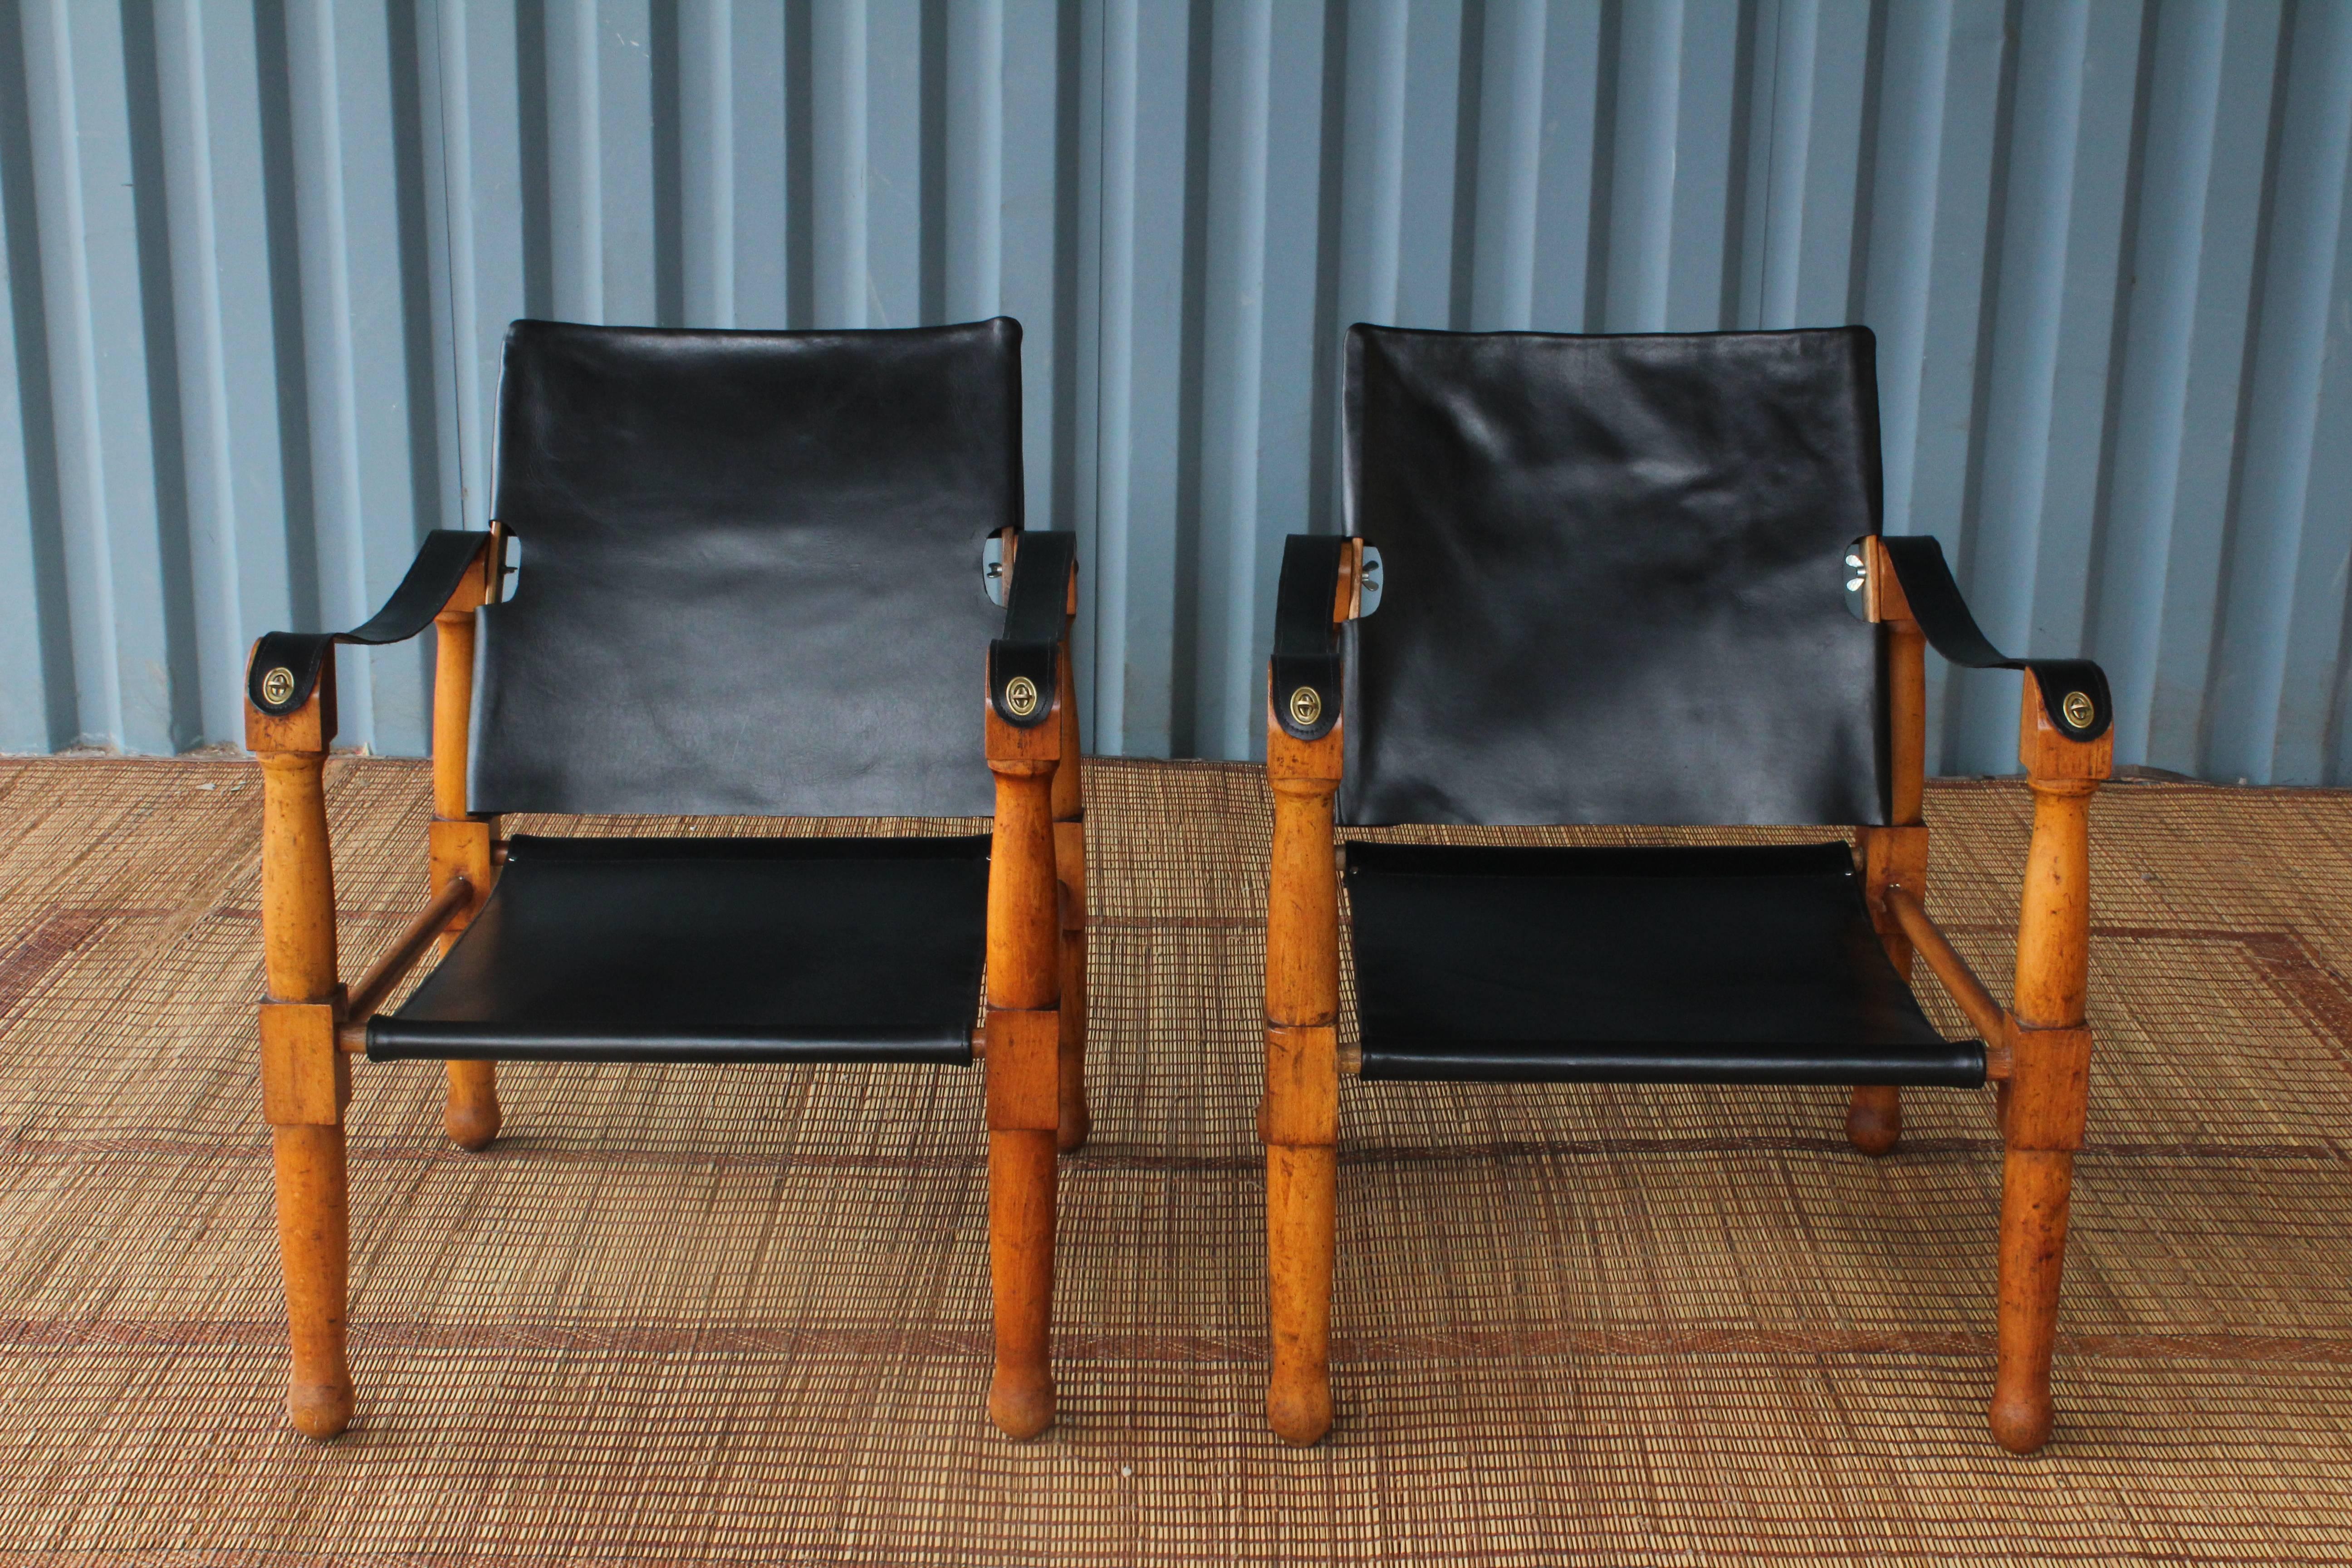 Pair of 1940s Scandinavian safari chairs with beech frames and leather slings. Frames retain their original patina and feature all new leather slings.